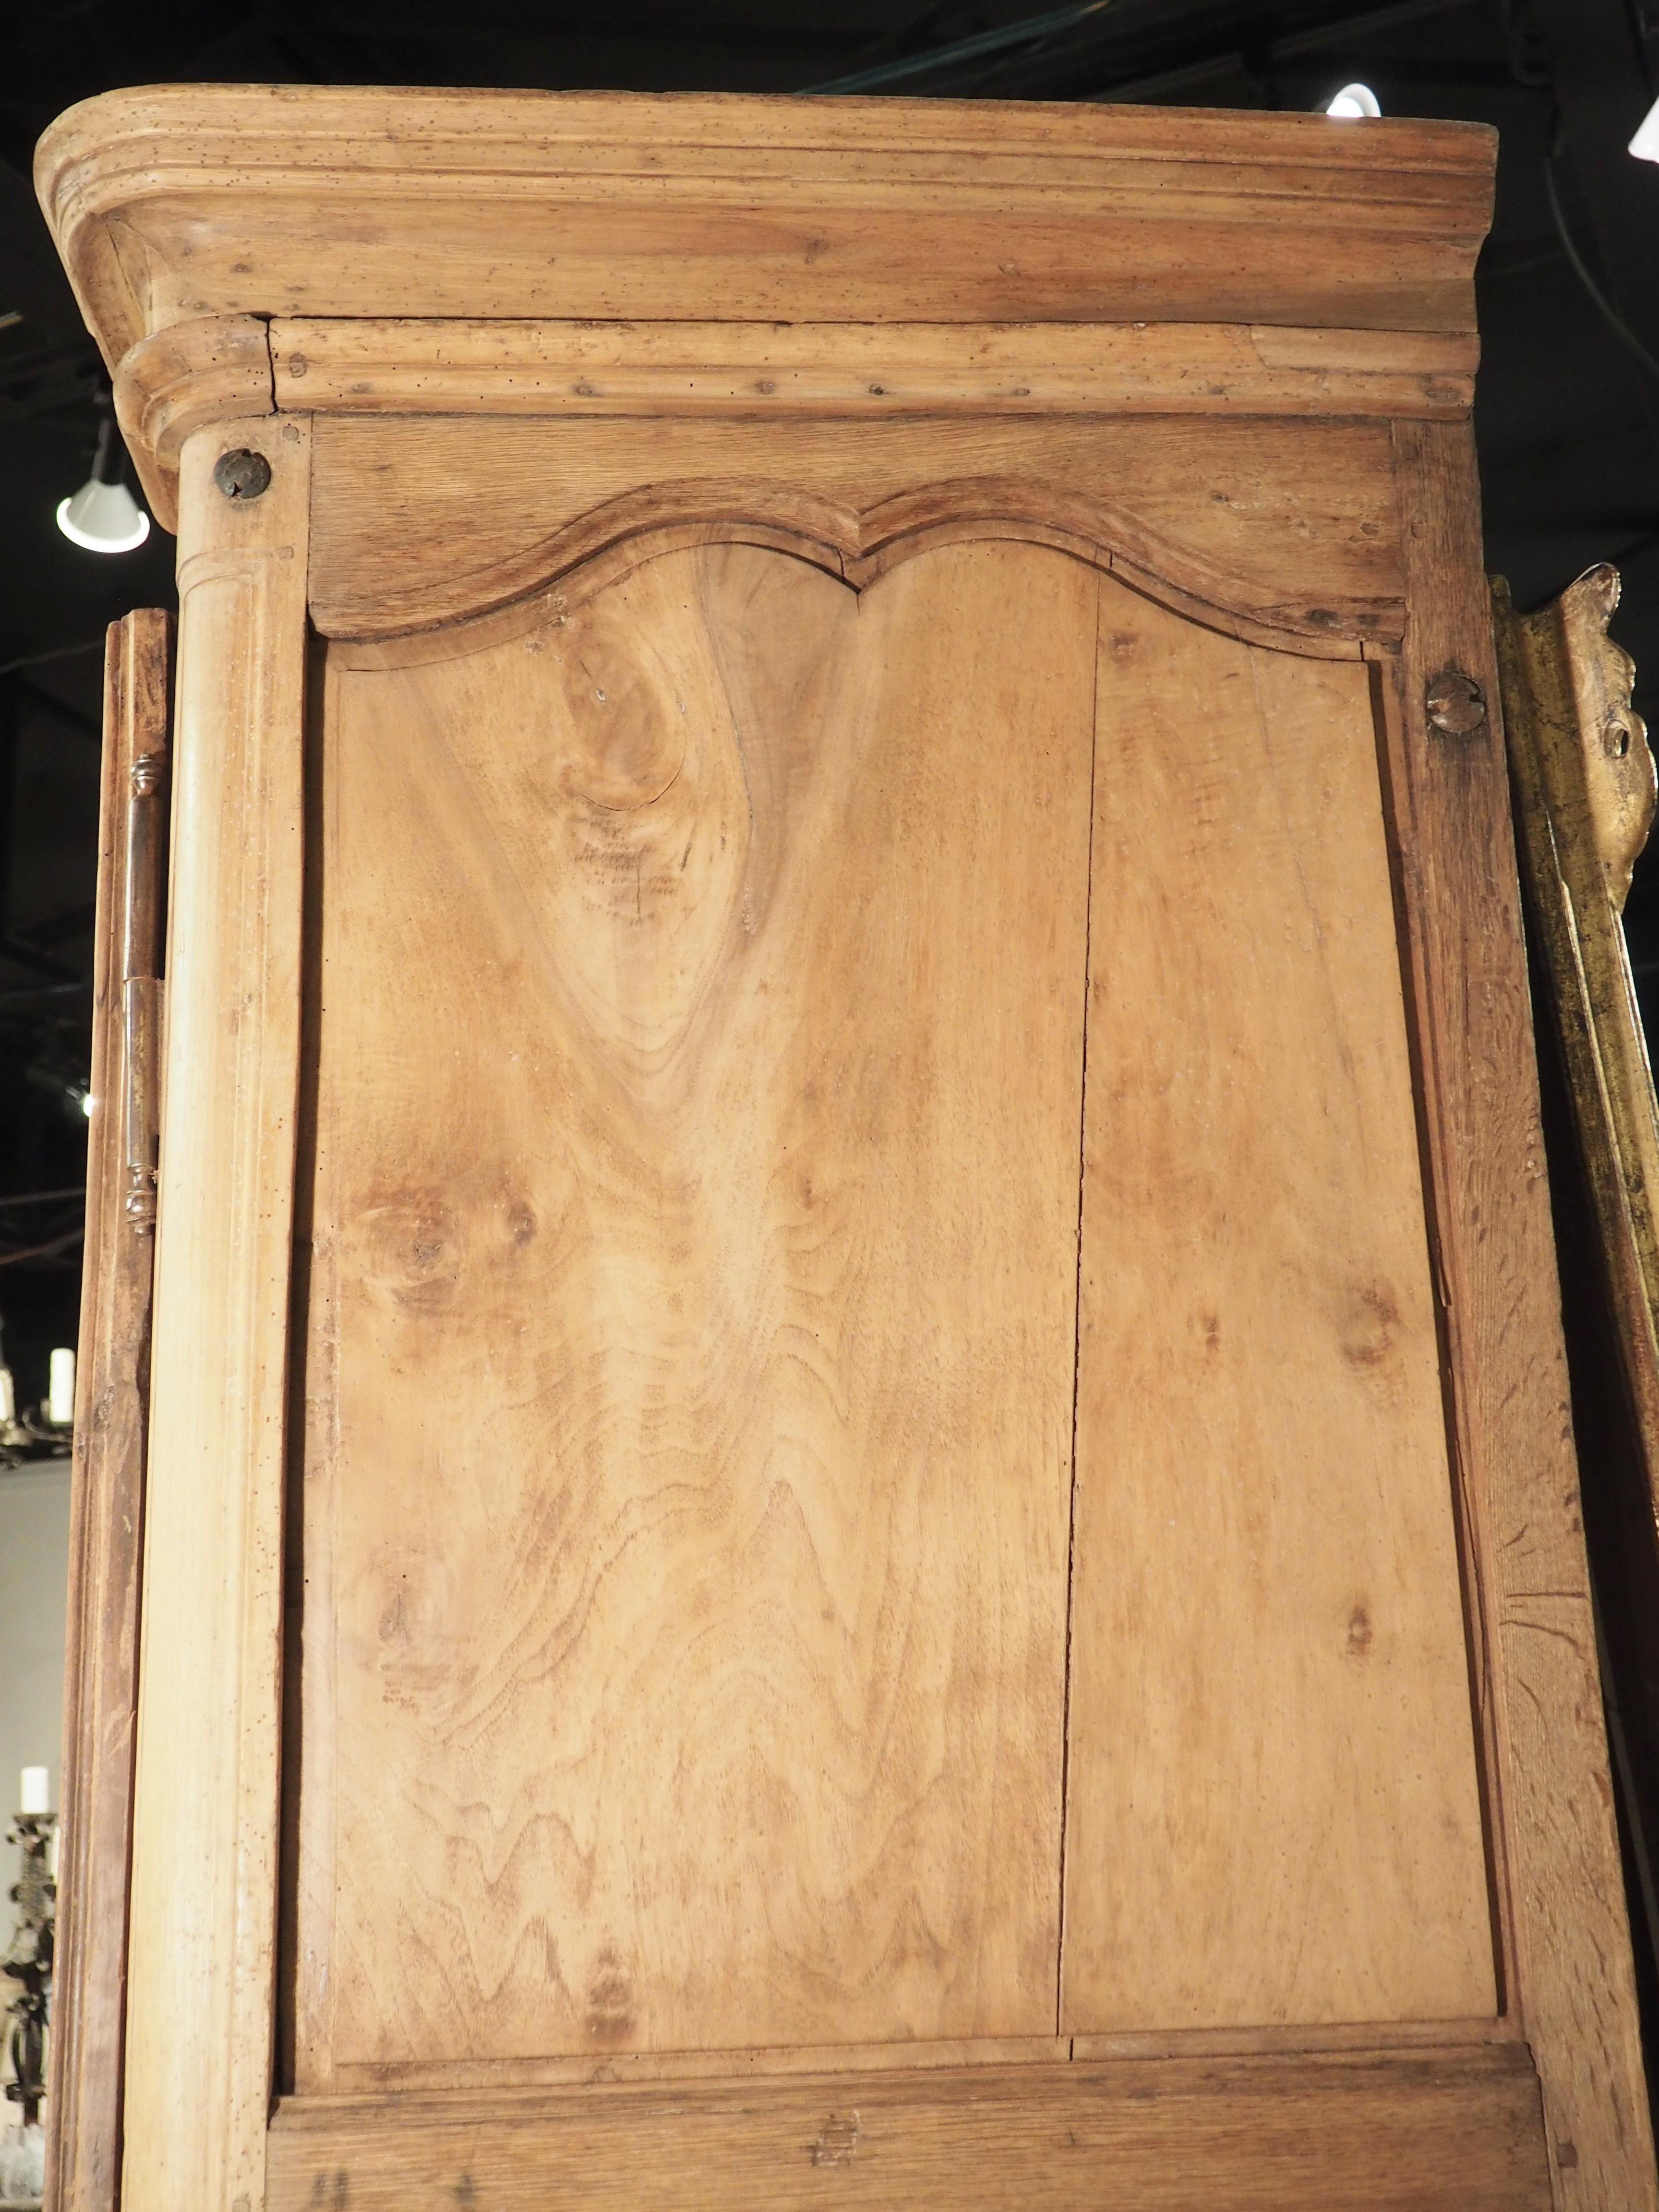 Typical of Ile-de-France furniture from the early 1700’s, this walnut armoire has unadorned panels, allowing the beautiful, curved moldings to take prominence. The walnut wood has been stripped of its original finish and bleached, leaving the wood a